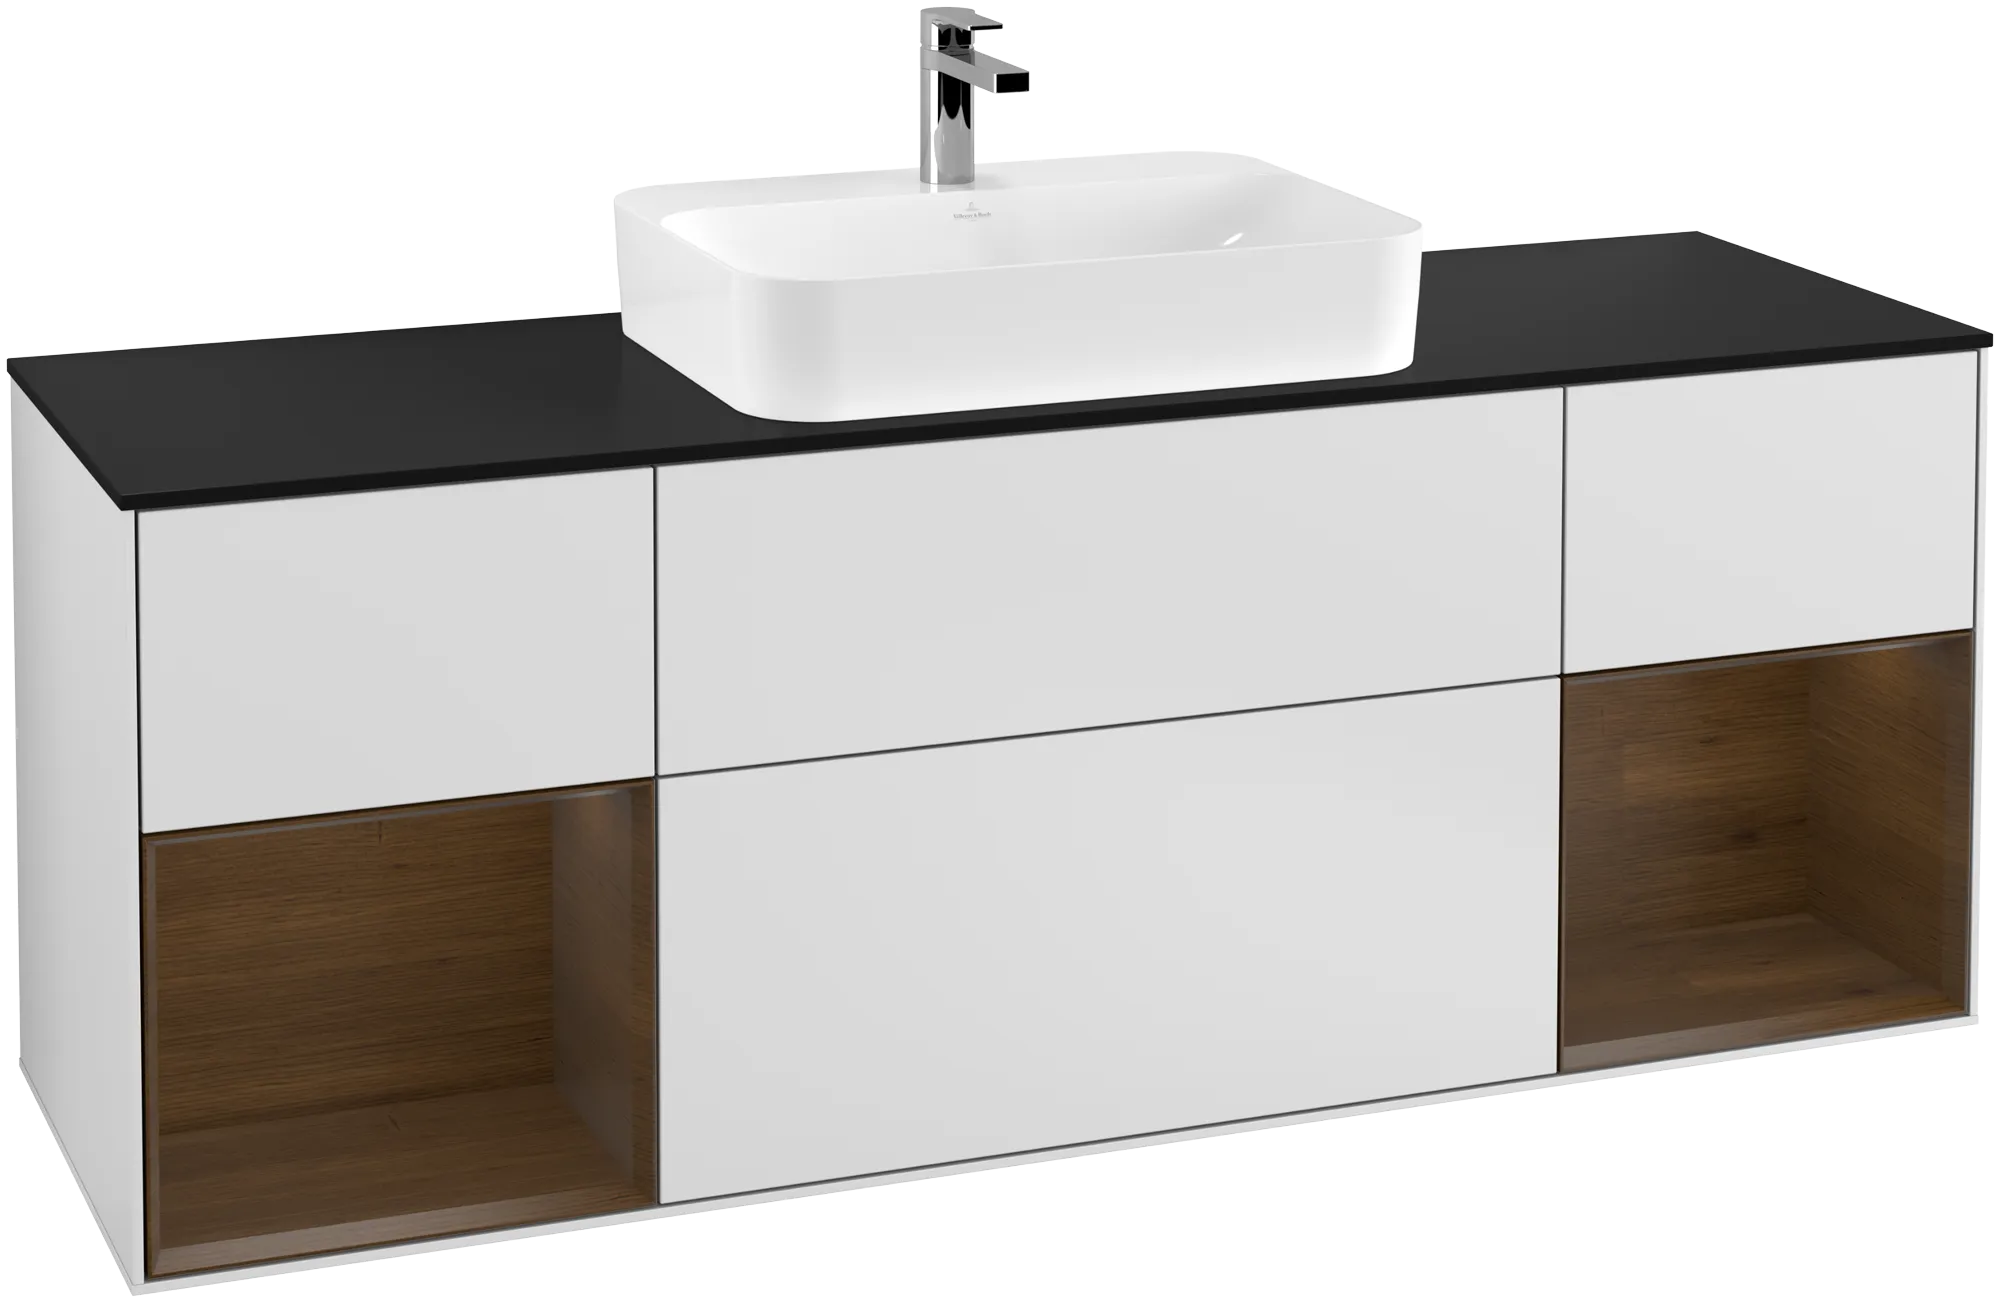 Picture of VILLEROY BOCH Finion Vanity unit, with lighting, 4 pull-out compartments, 1600 x 603 x 501 mm, White Matt Lacquer / Walnut Veneer / Glass Black Matt #G452GNMT